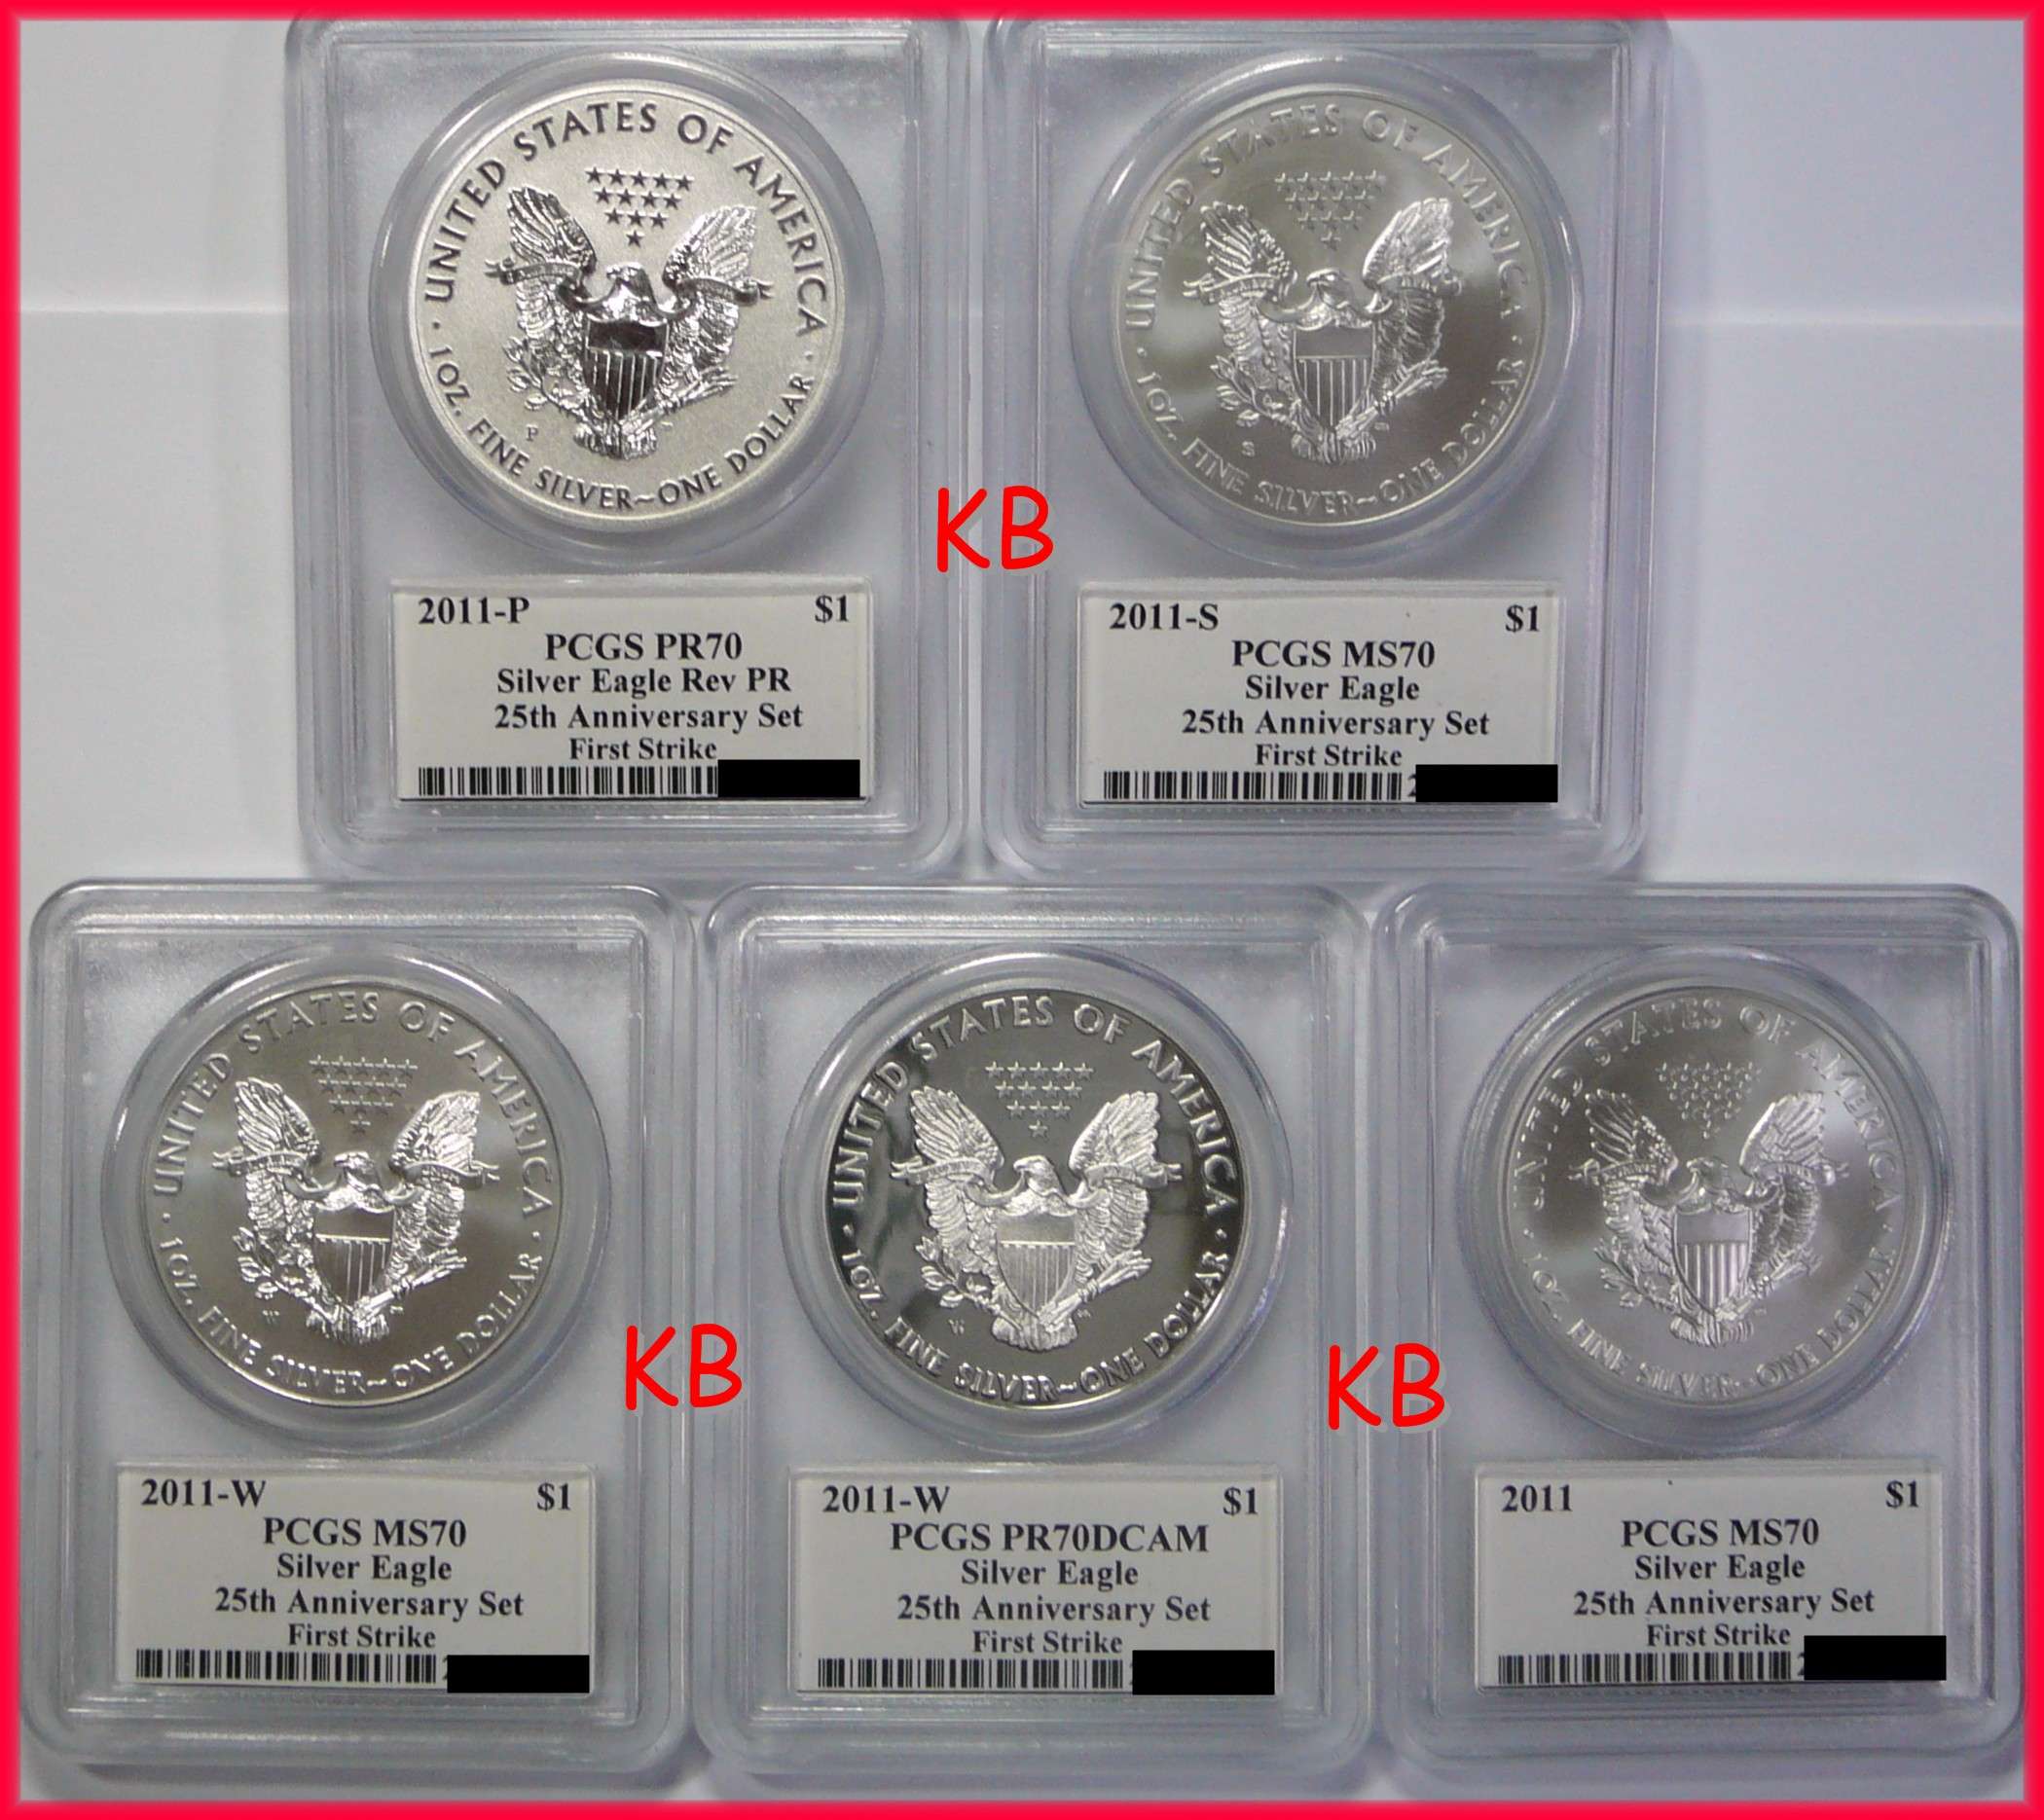 American Silver Eagle Mintage Chart